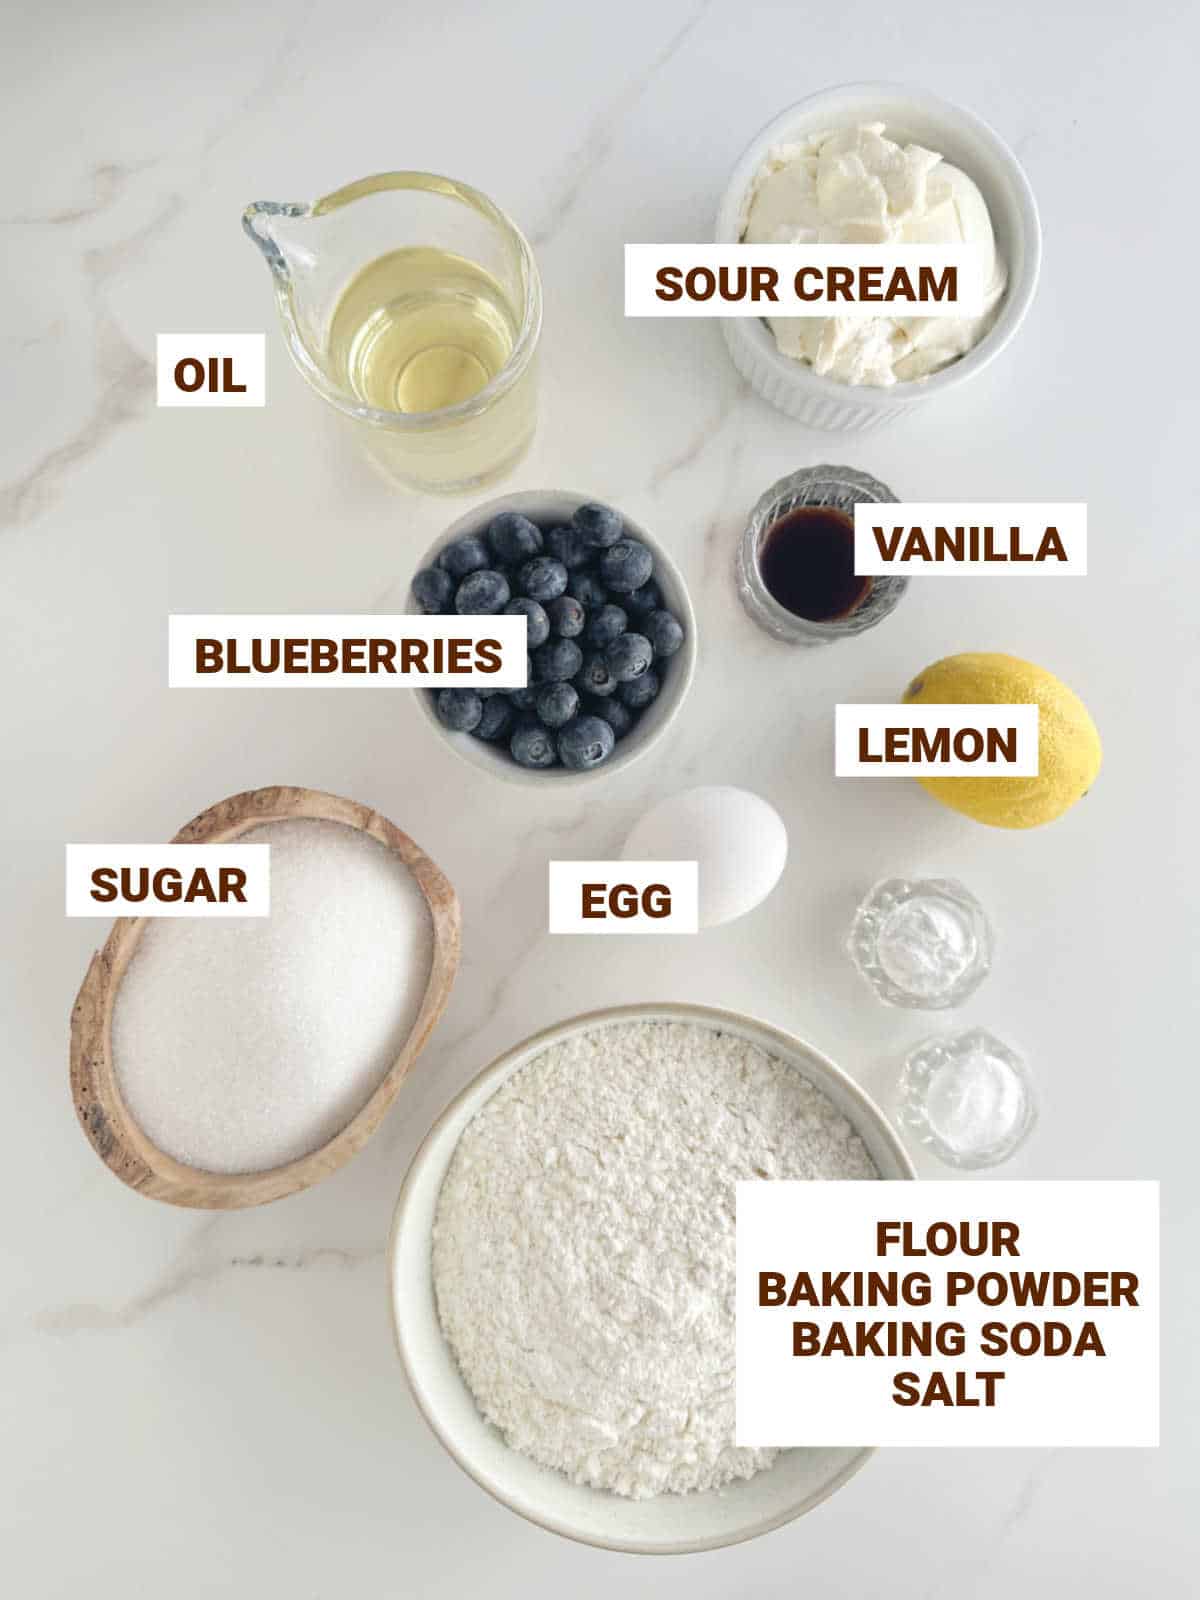 Bowls on a white surface containing ingredients for blueberry cake including egg, lemon, sugar, oil, vanilla, flour, sour cream.